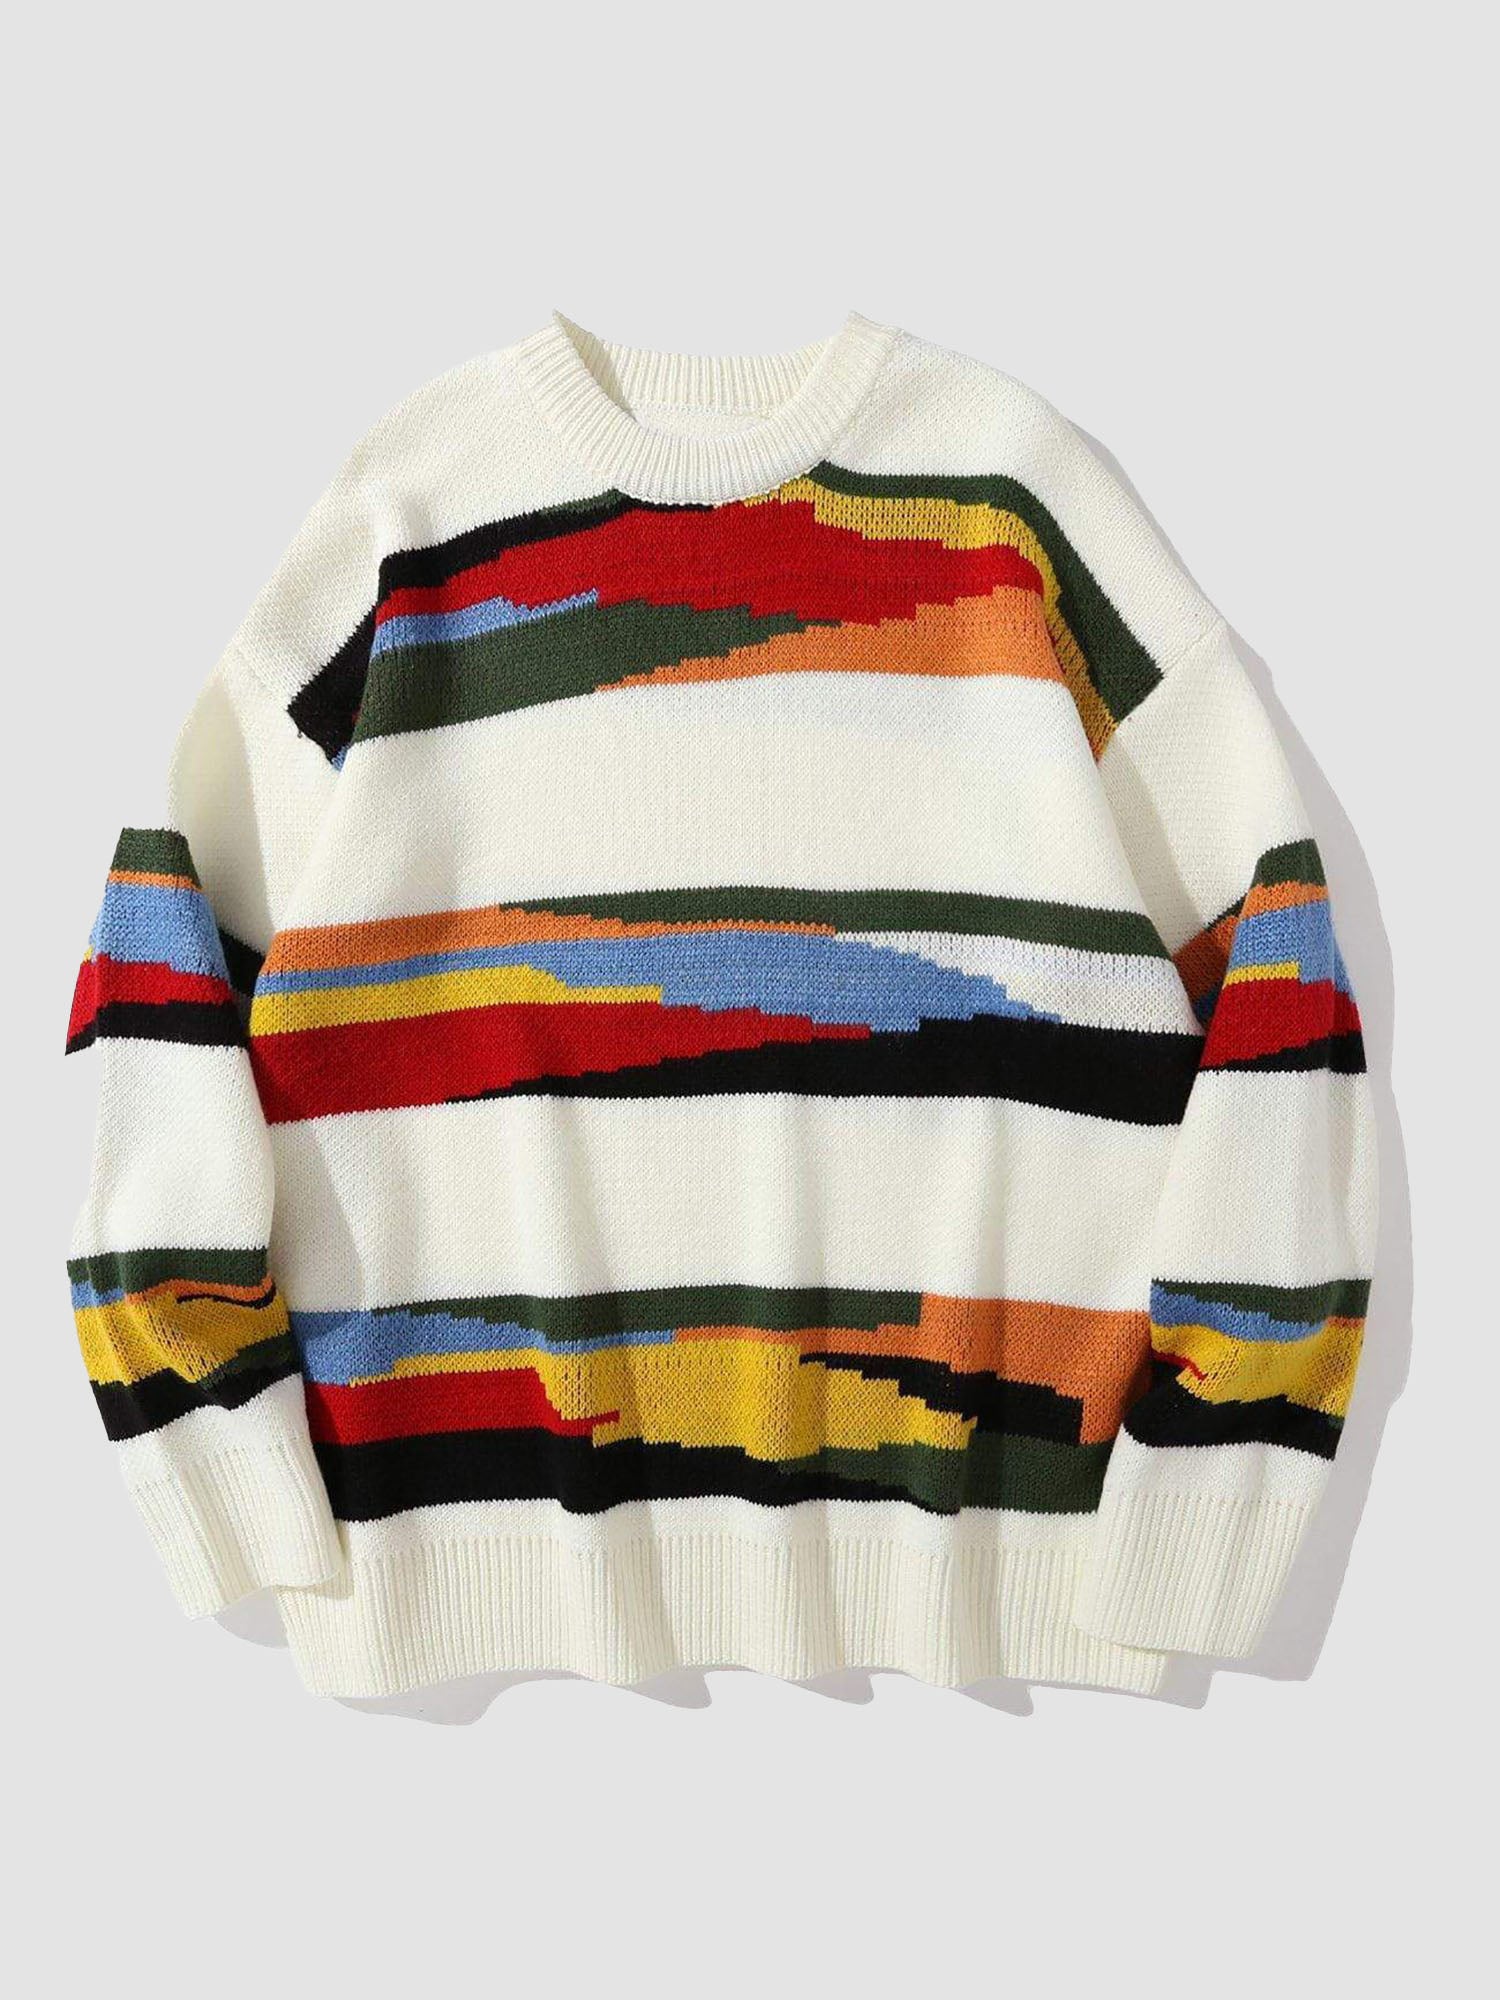 JUSTNOTAG Irregular Striped Knitted Sweater